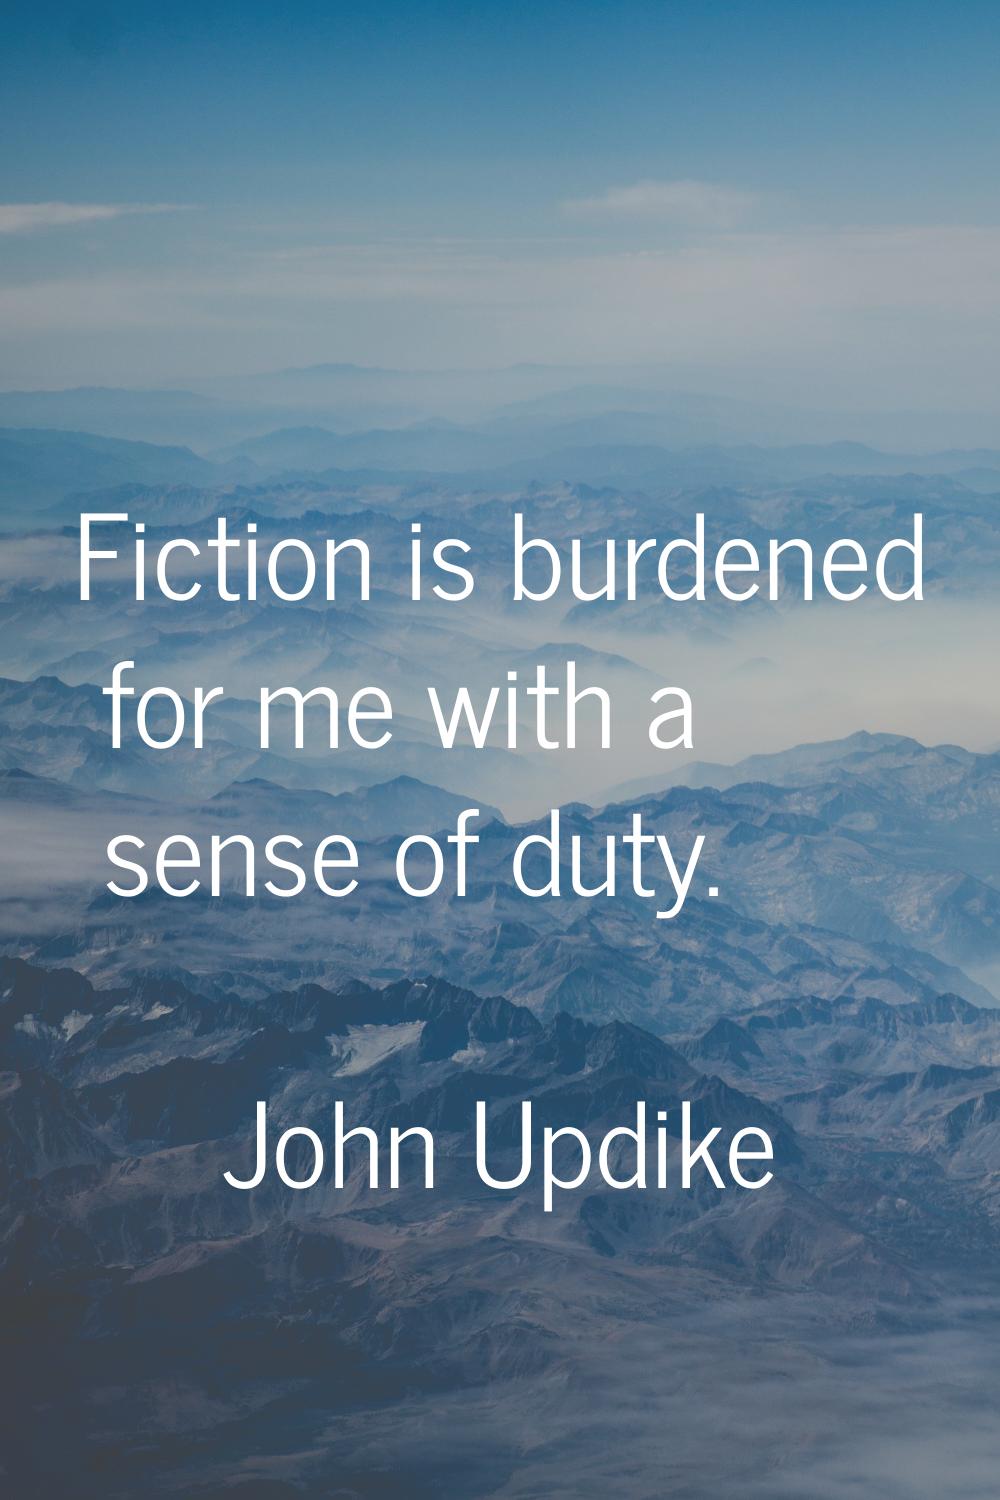 Fiction is burdened for me with a sense of duty.